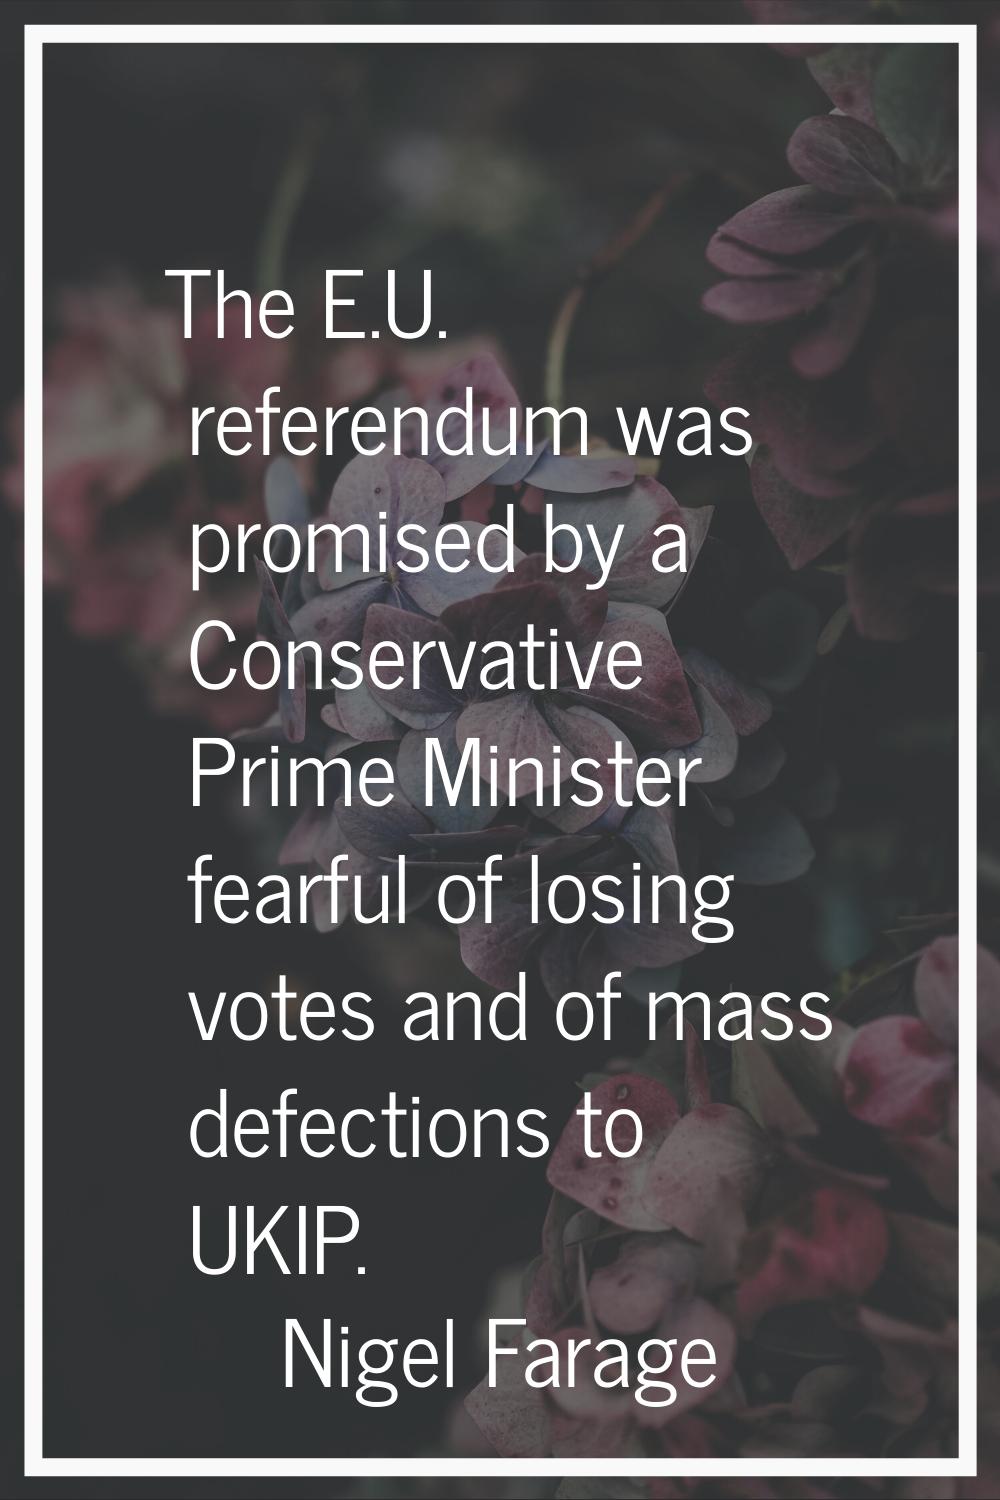 The E.U. referendum was promised by a Conservative Prime Minister fearful of losing votes and of ma